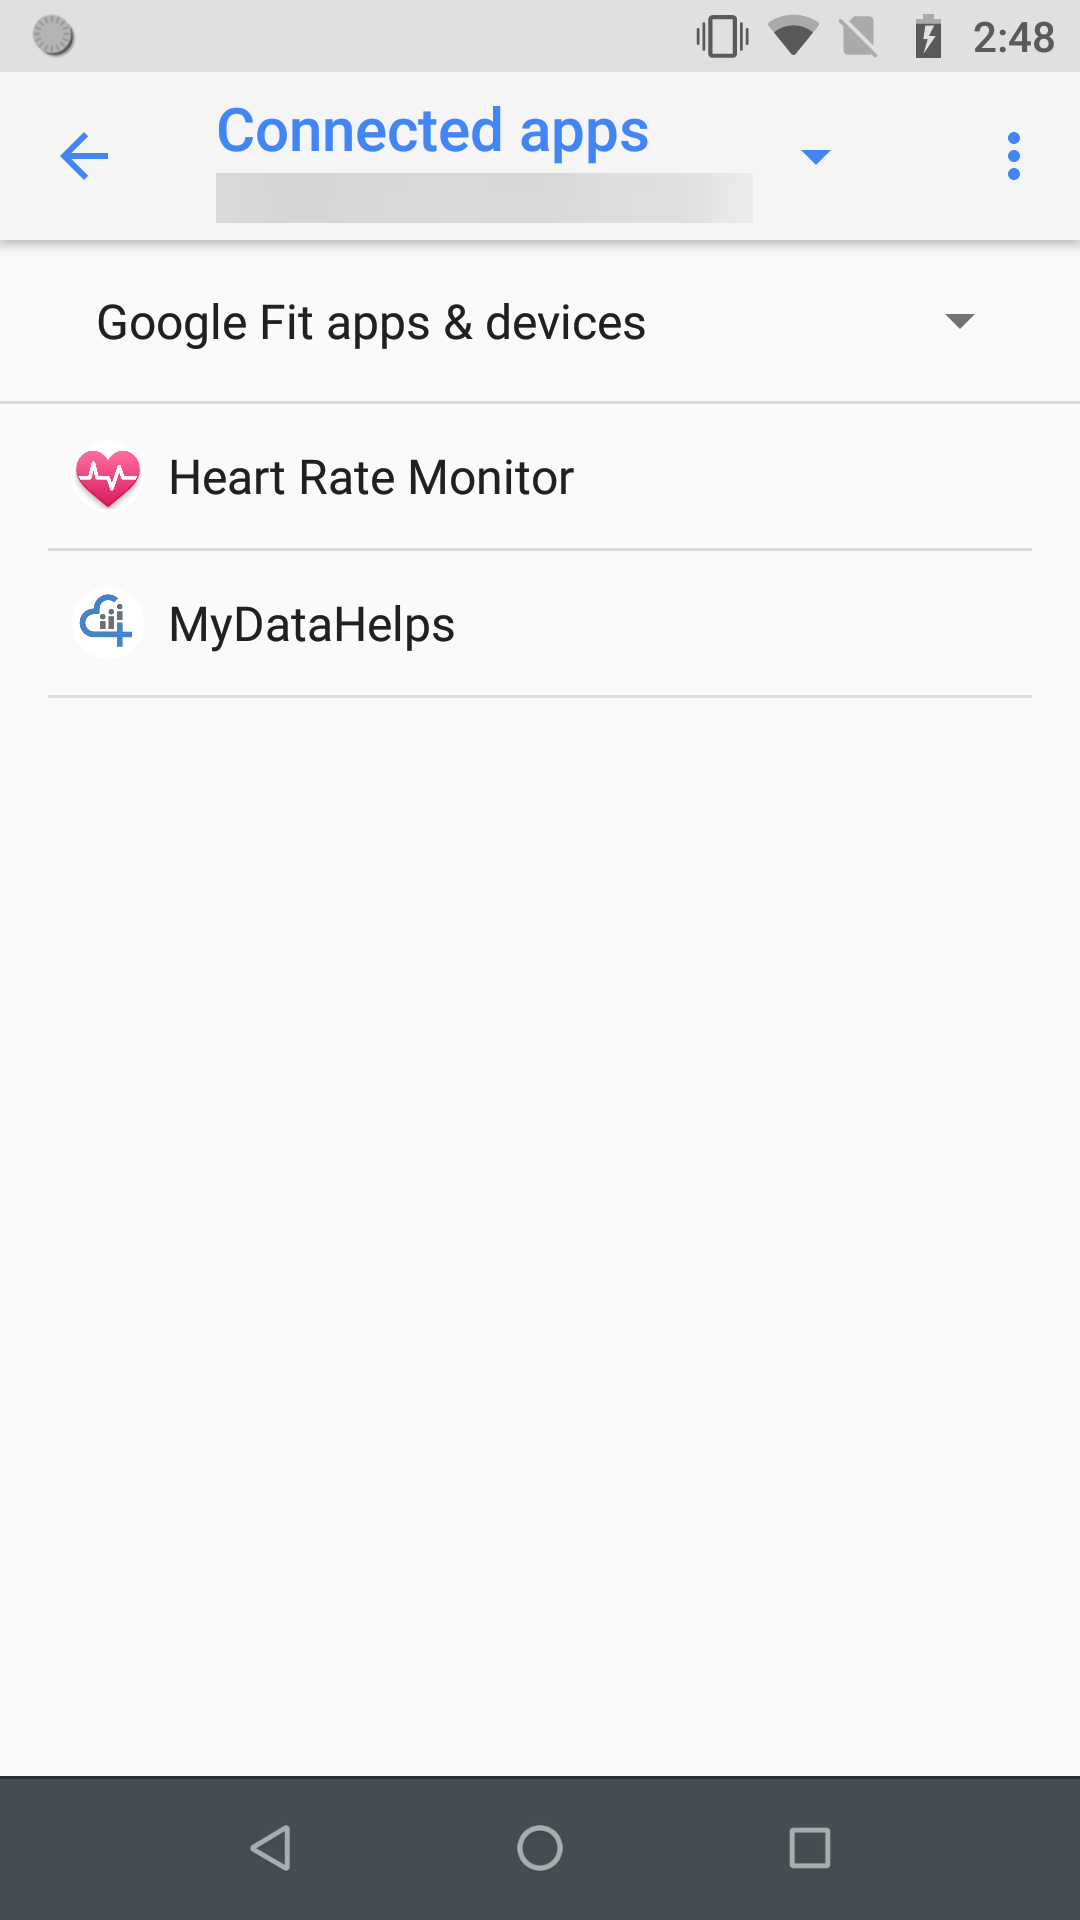 Google_Fit_Connected_Apps.png